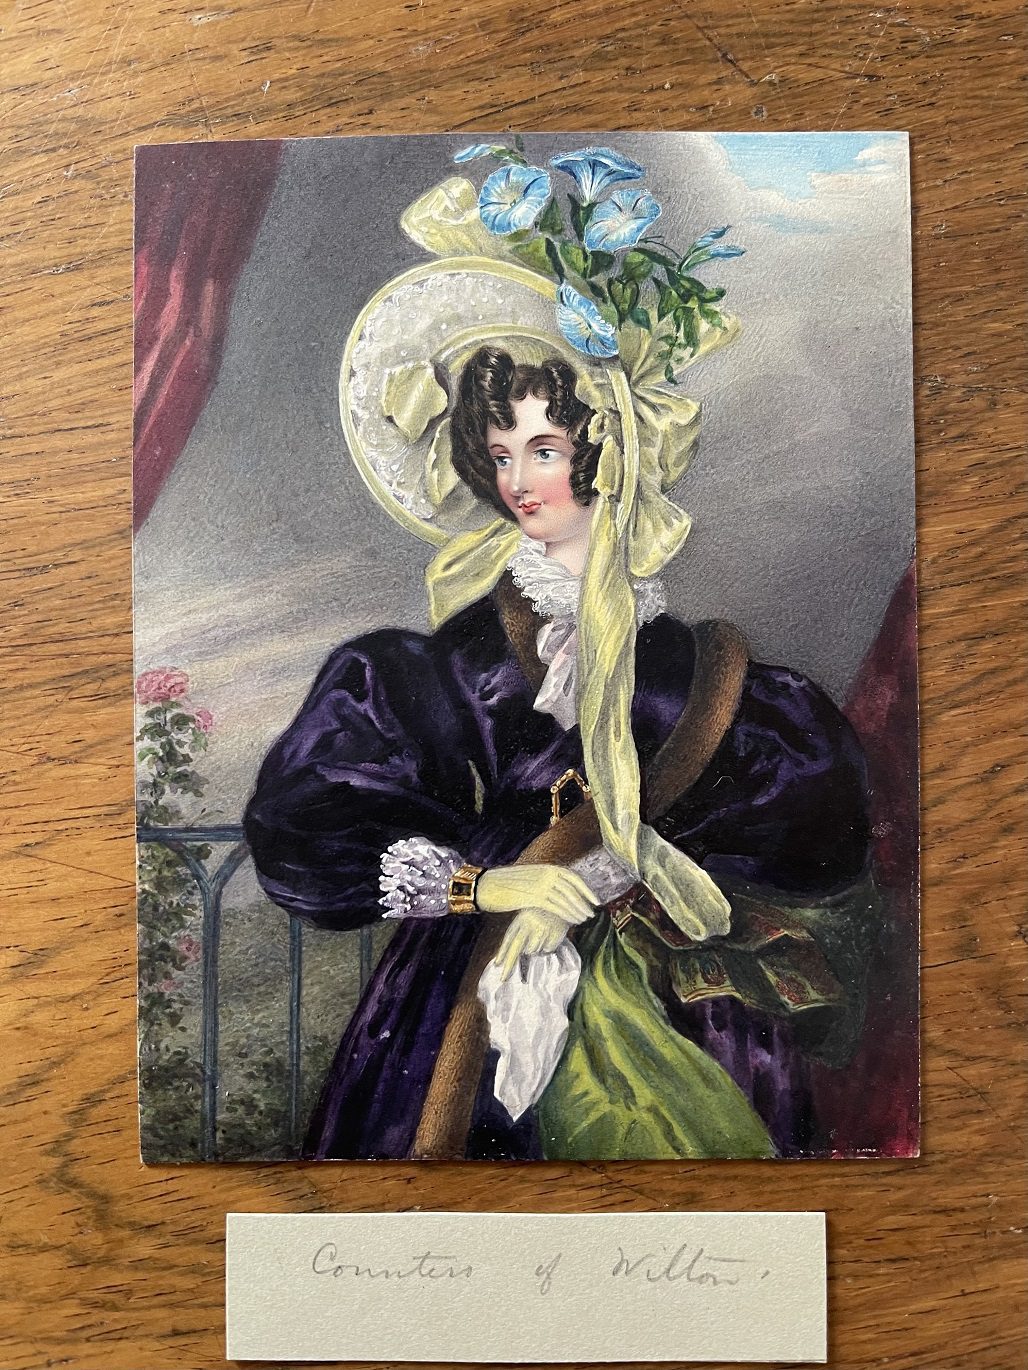 6 The Second Countess of Wilton in a minature wartercolour, 1830, I purchased for the Friends of Heaton Hall